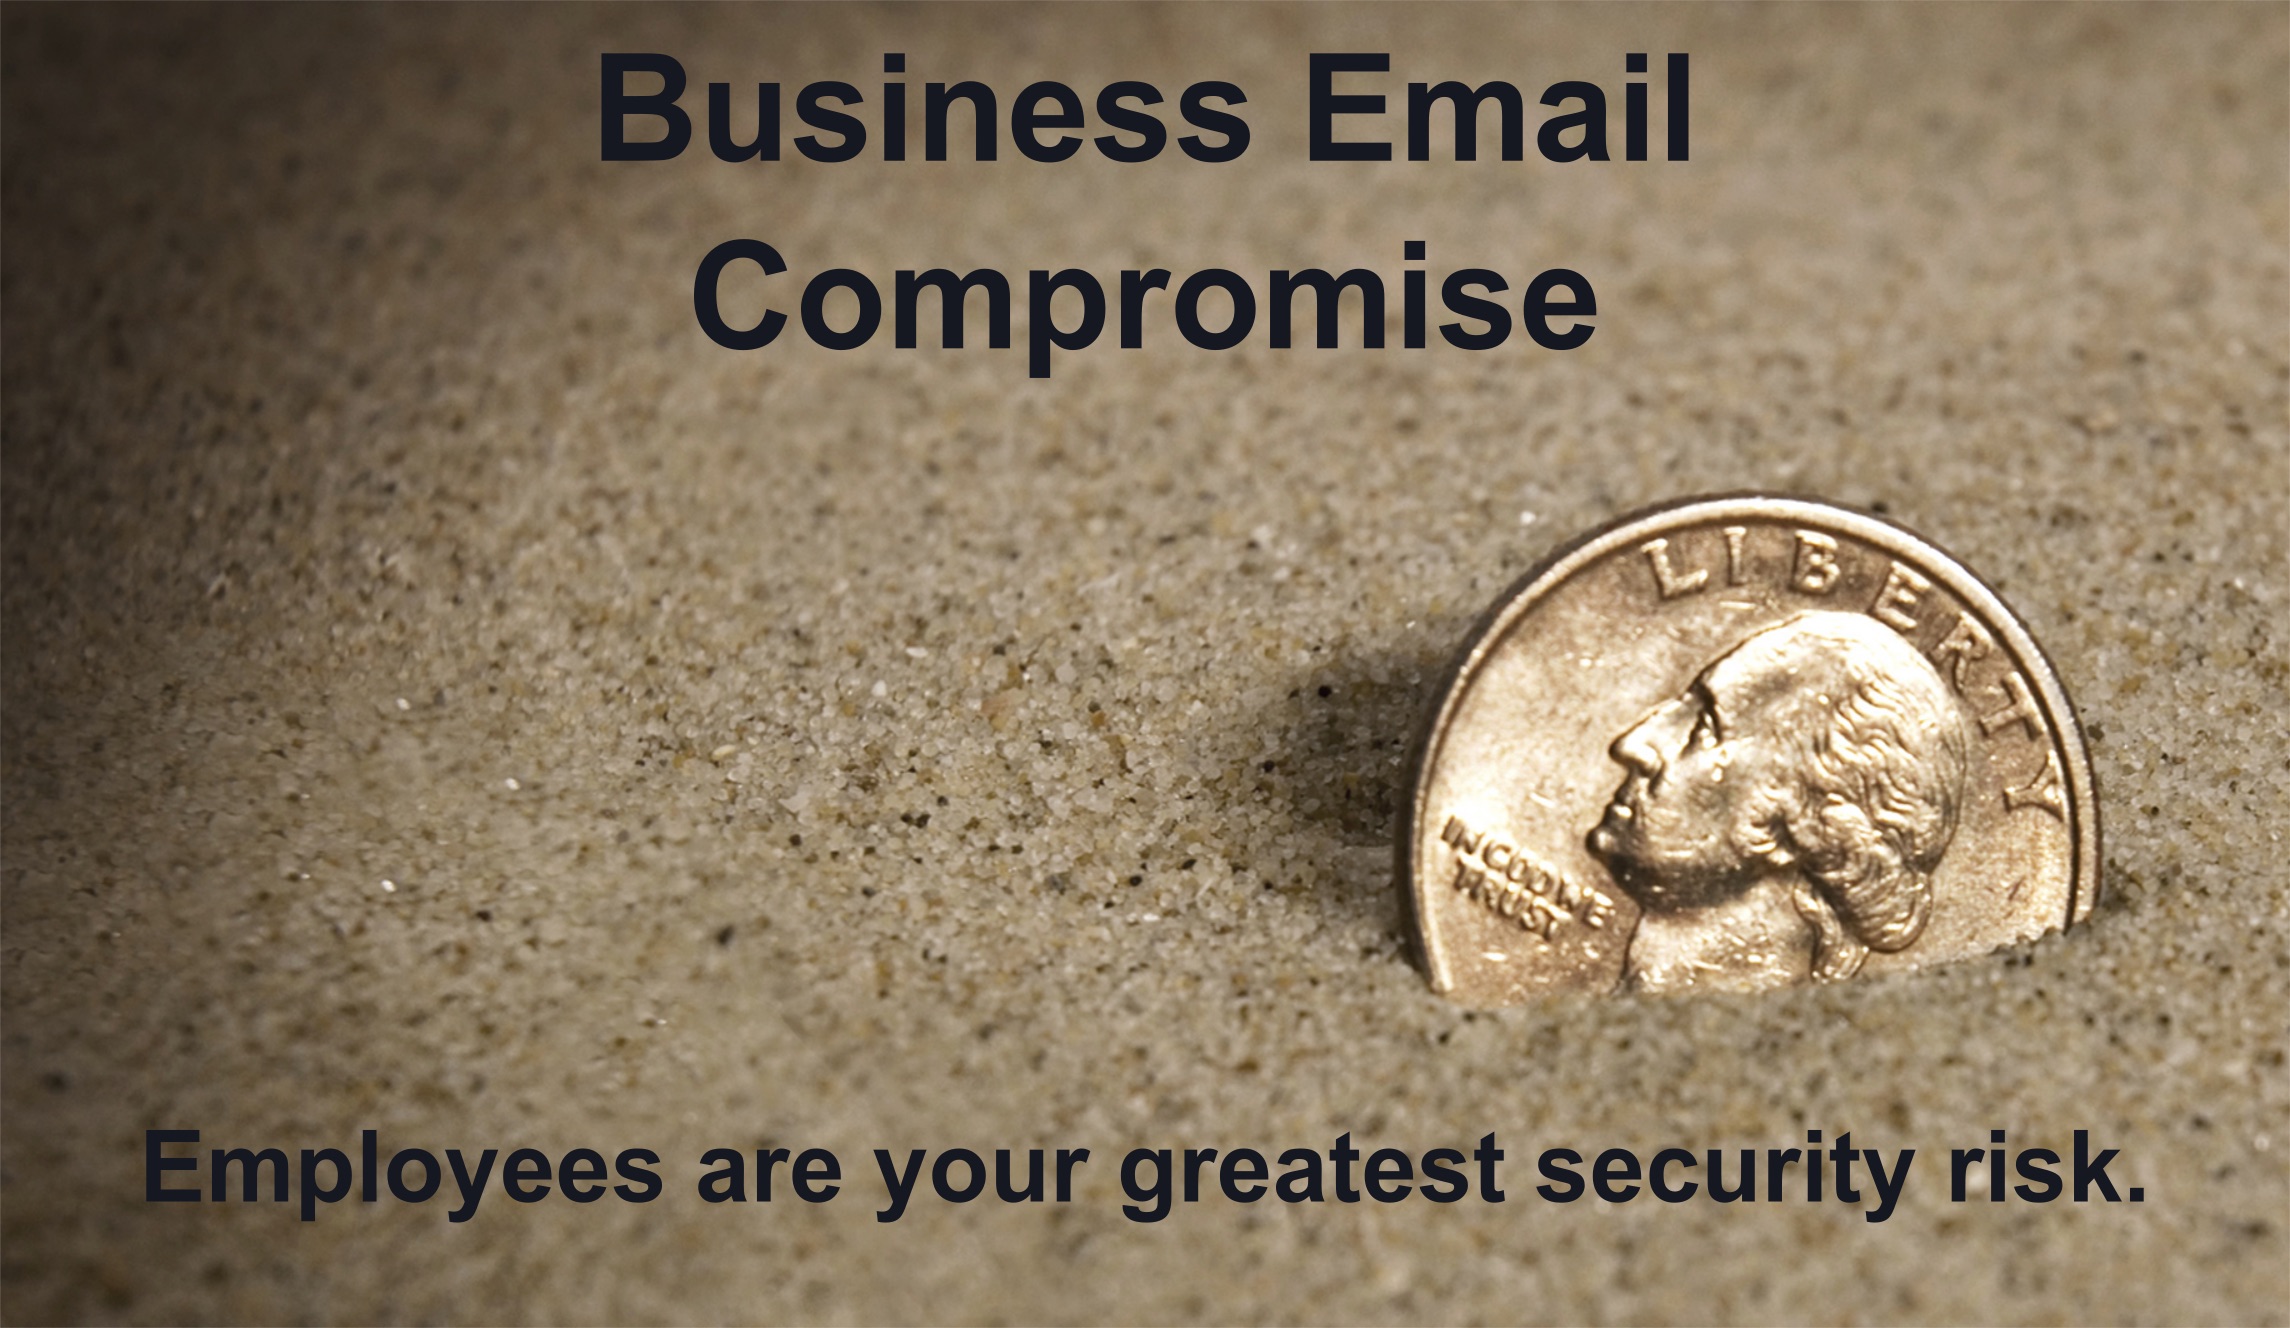 Business email image